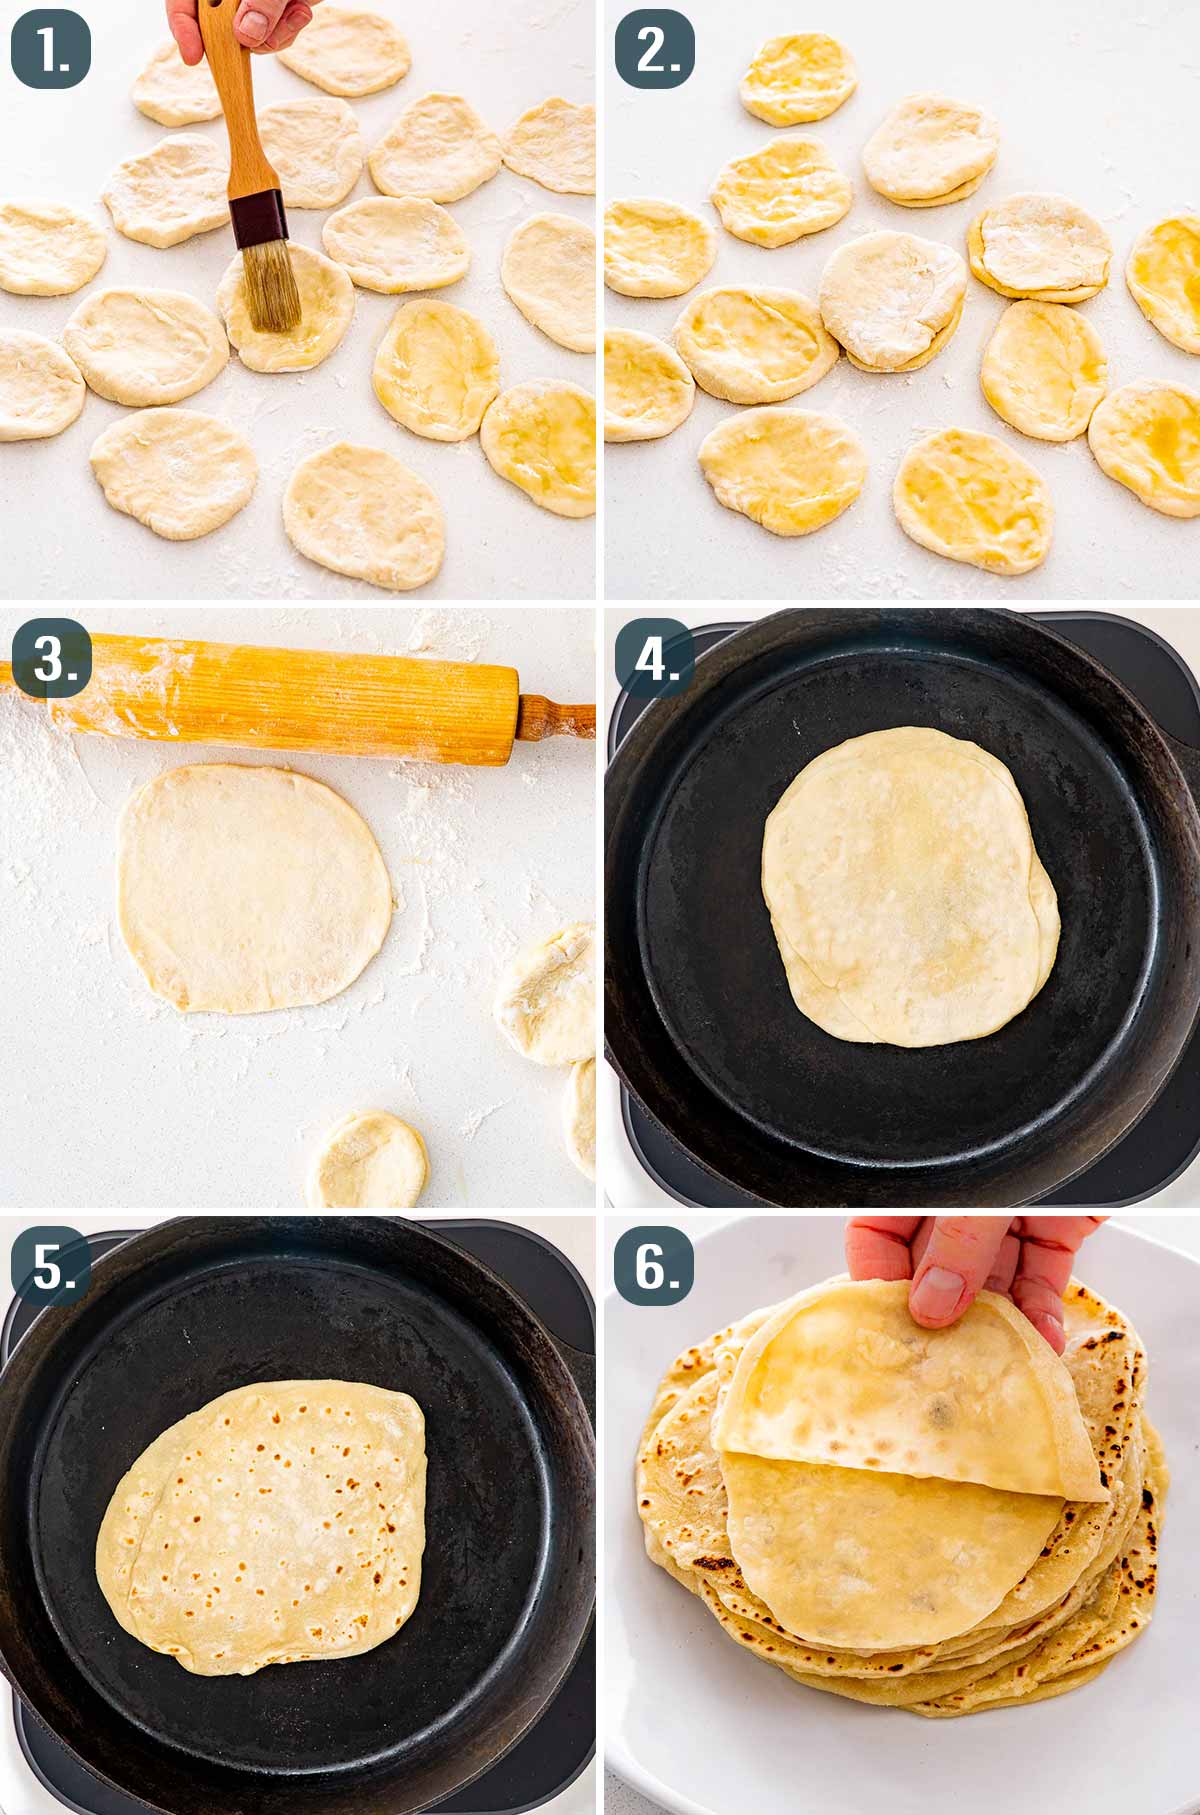 process shots showing how to shape mandarin pancakes and cook them.